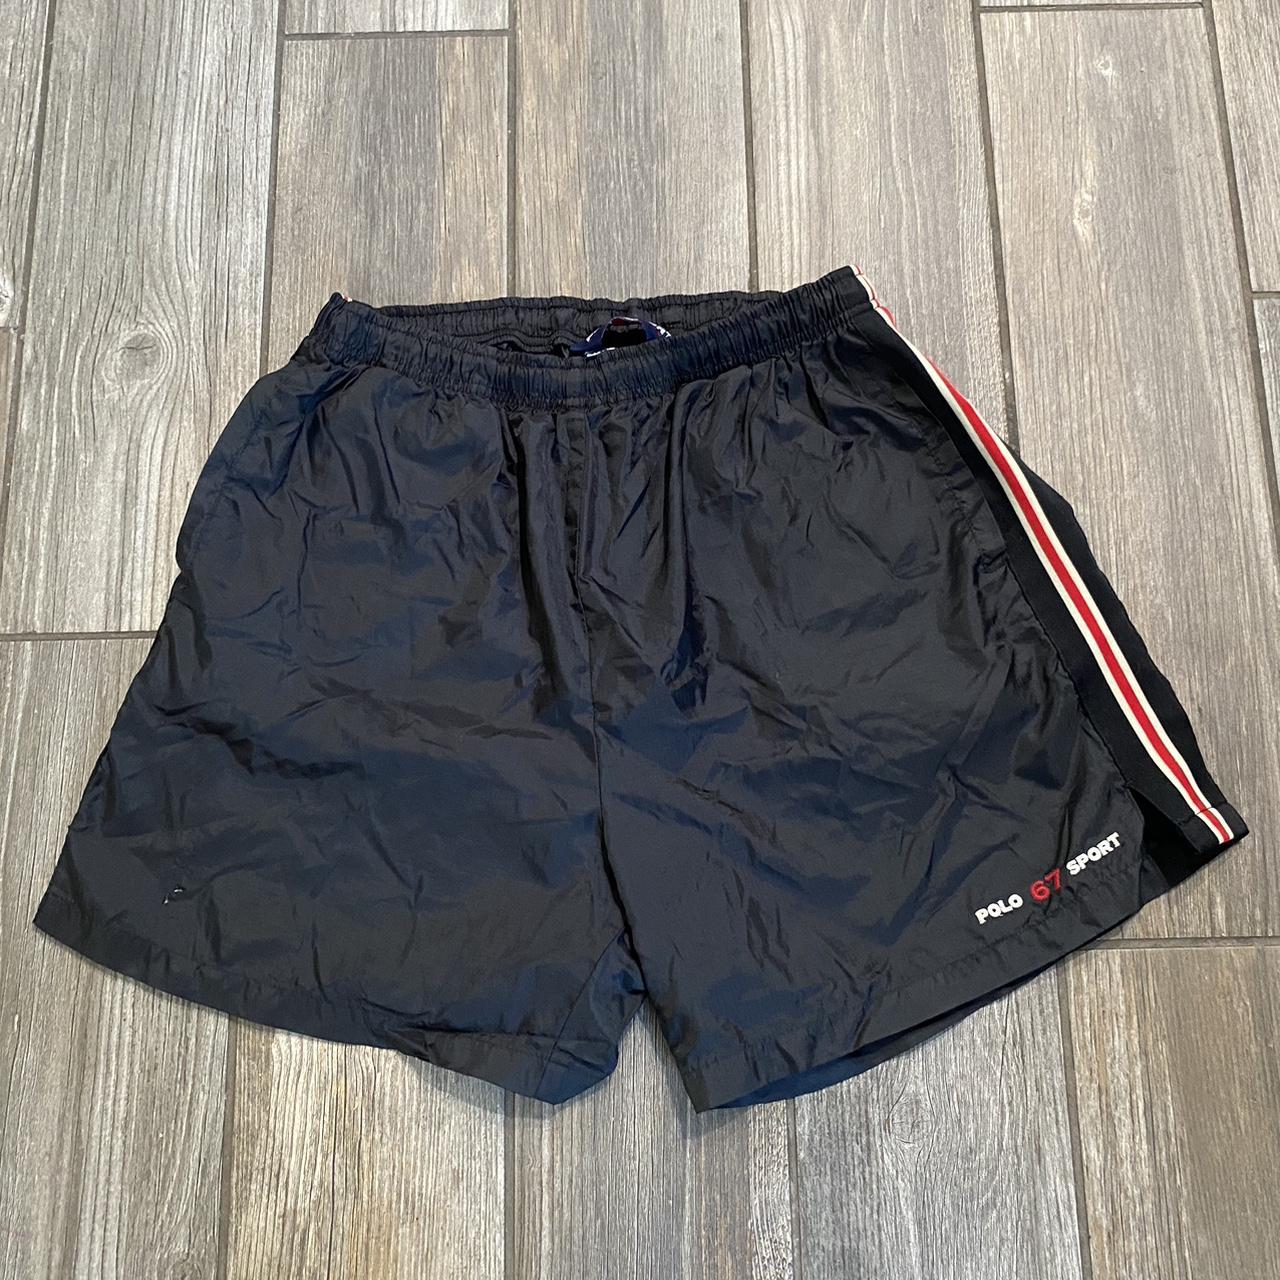 Polo Sport Men's Black and Red Shorts | Depop